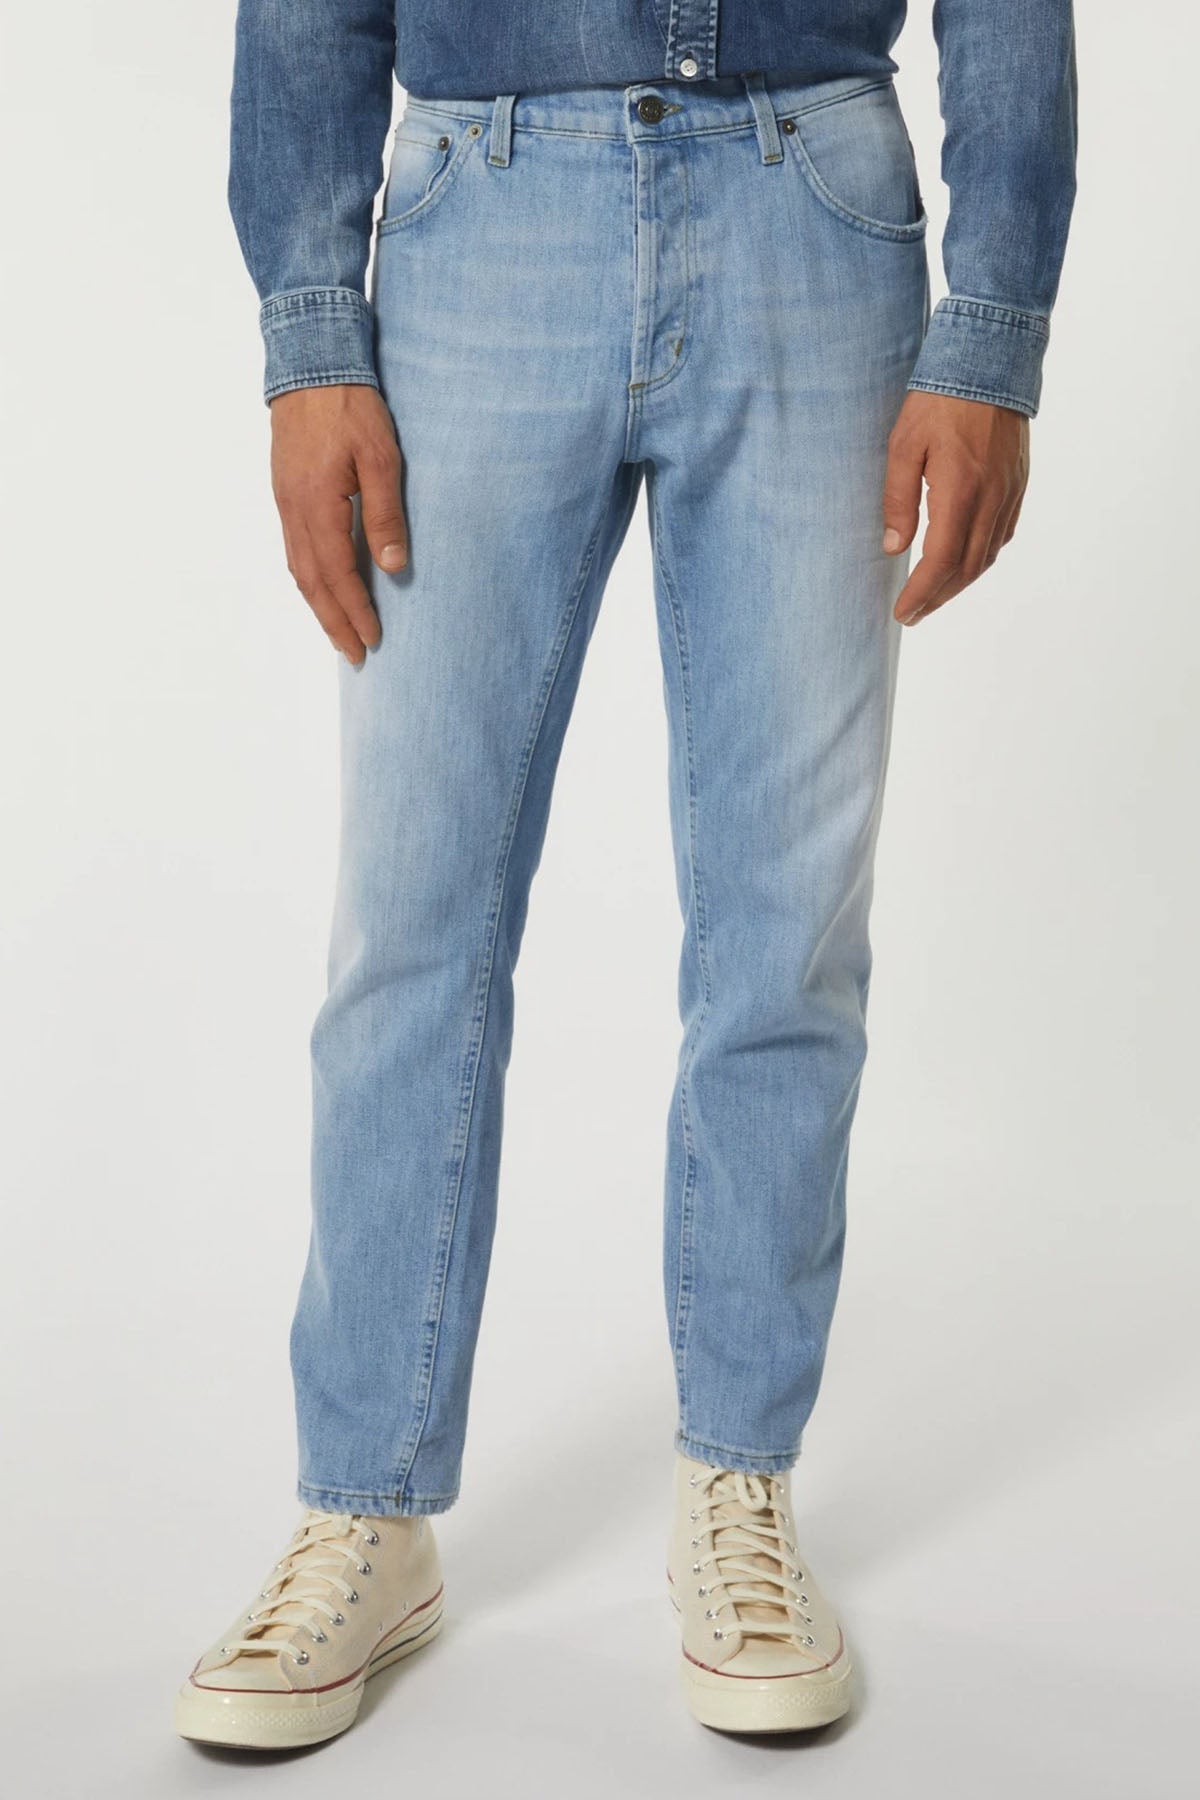 Dondup Brighton Carrot Fit Jeans